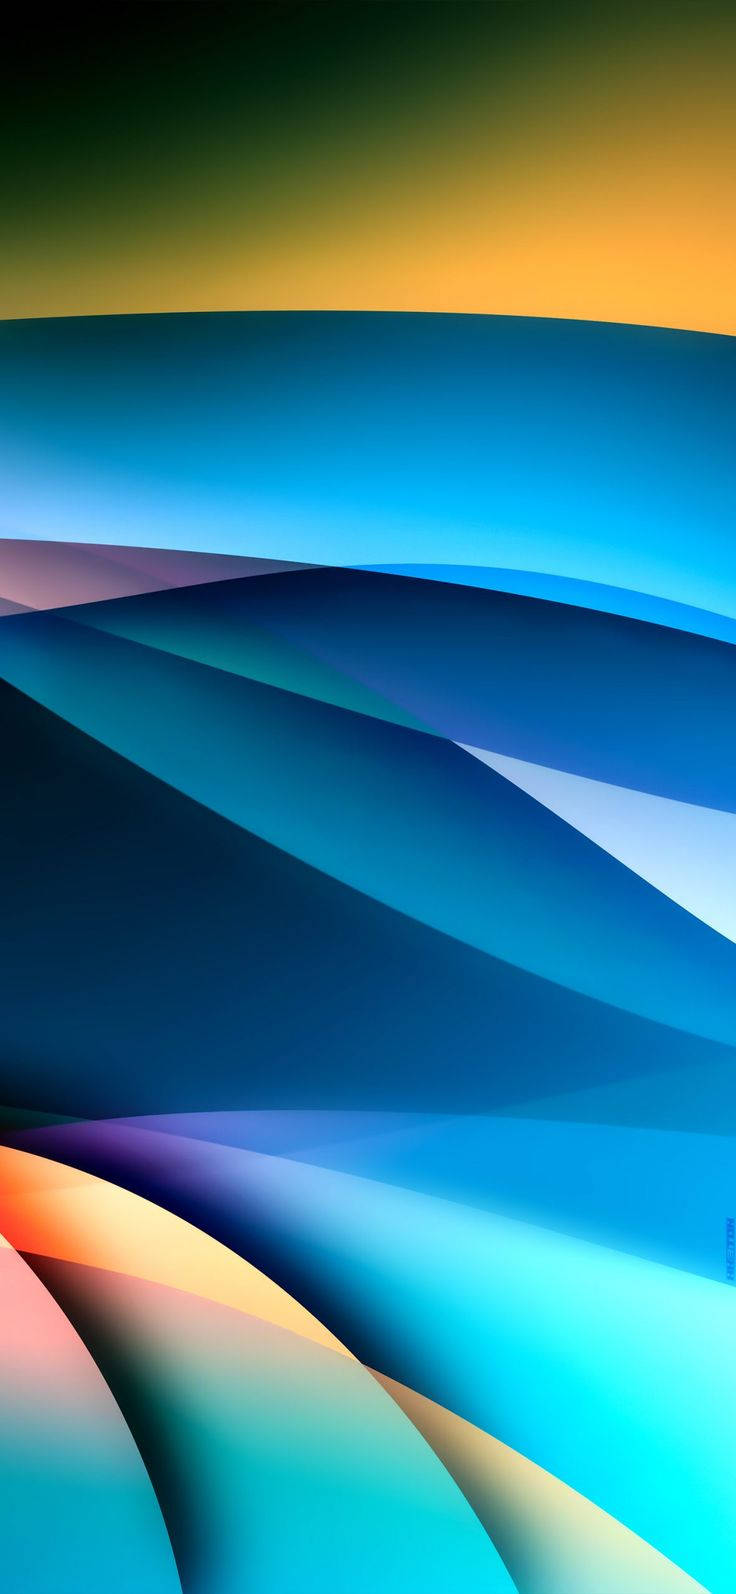 100+] Ios 15 Wallpapers